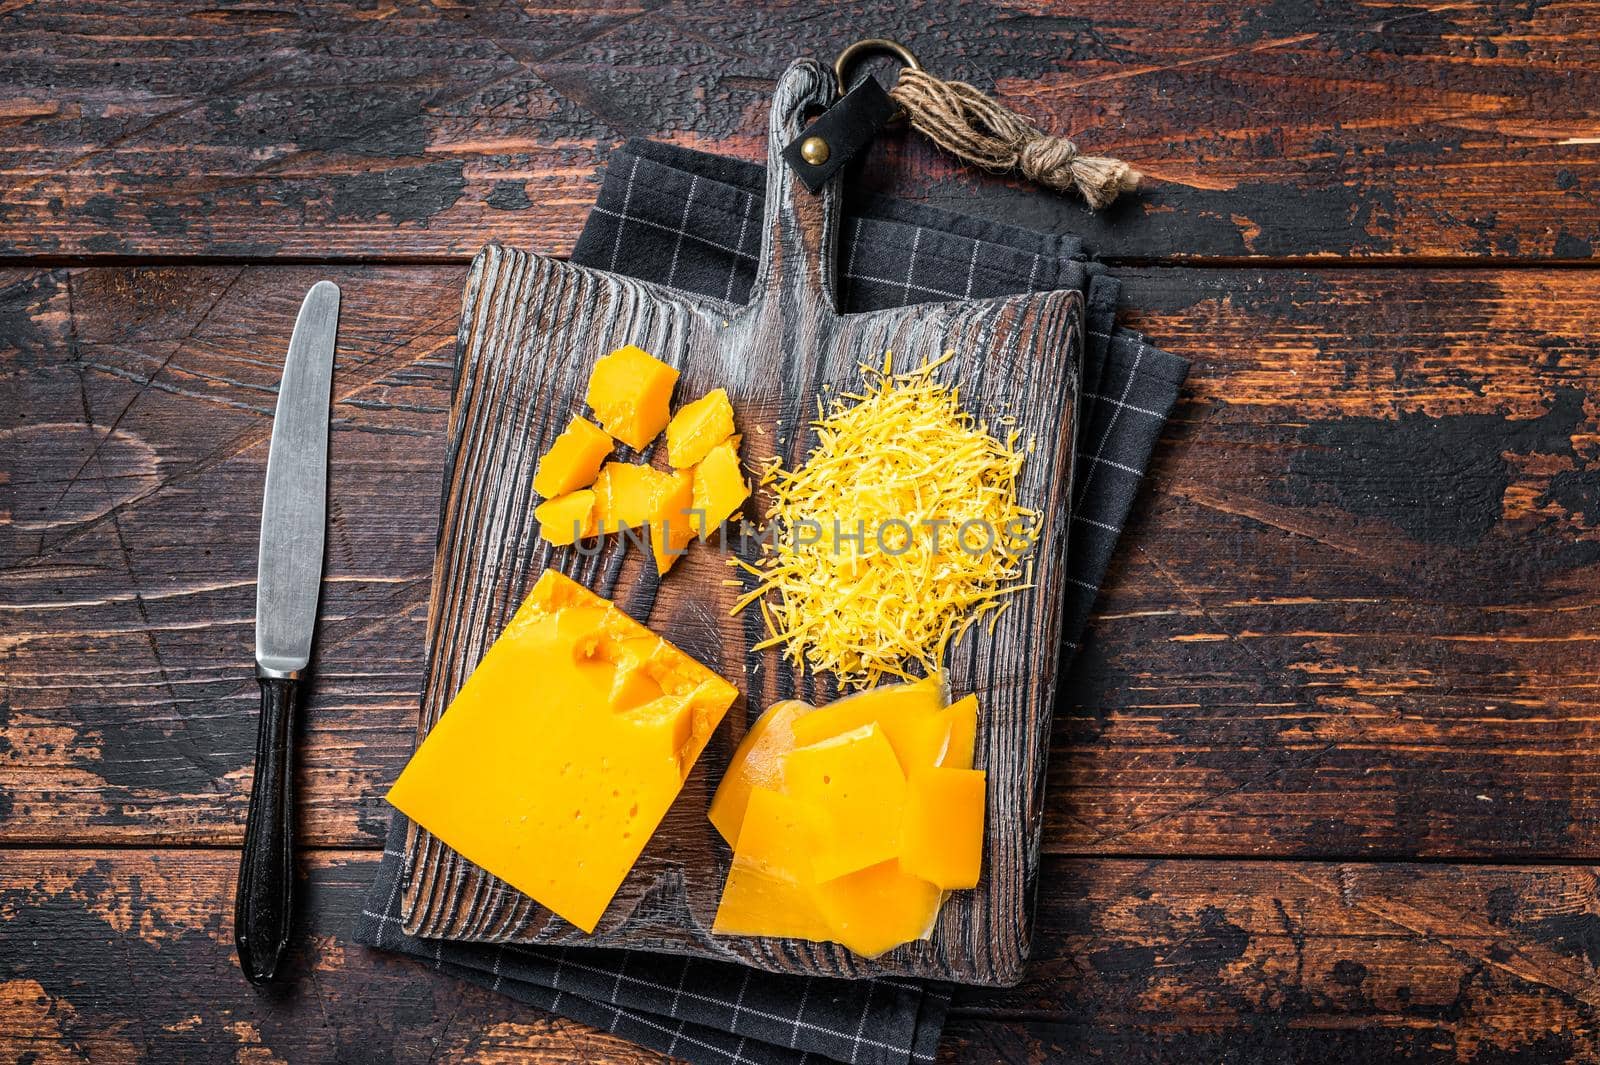 Grated and diceded Cheddar Cheese on a wooden chopping board. Dark wooden background. Top view by Composter